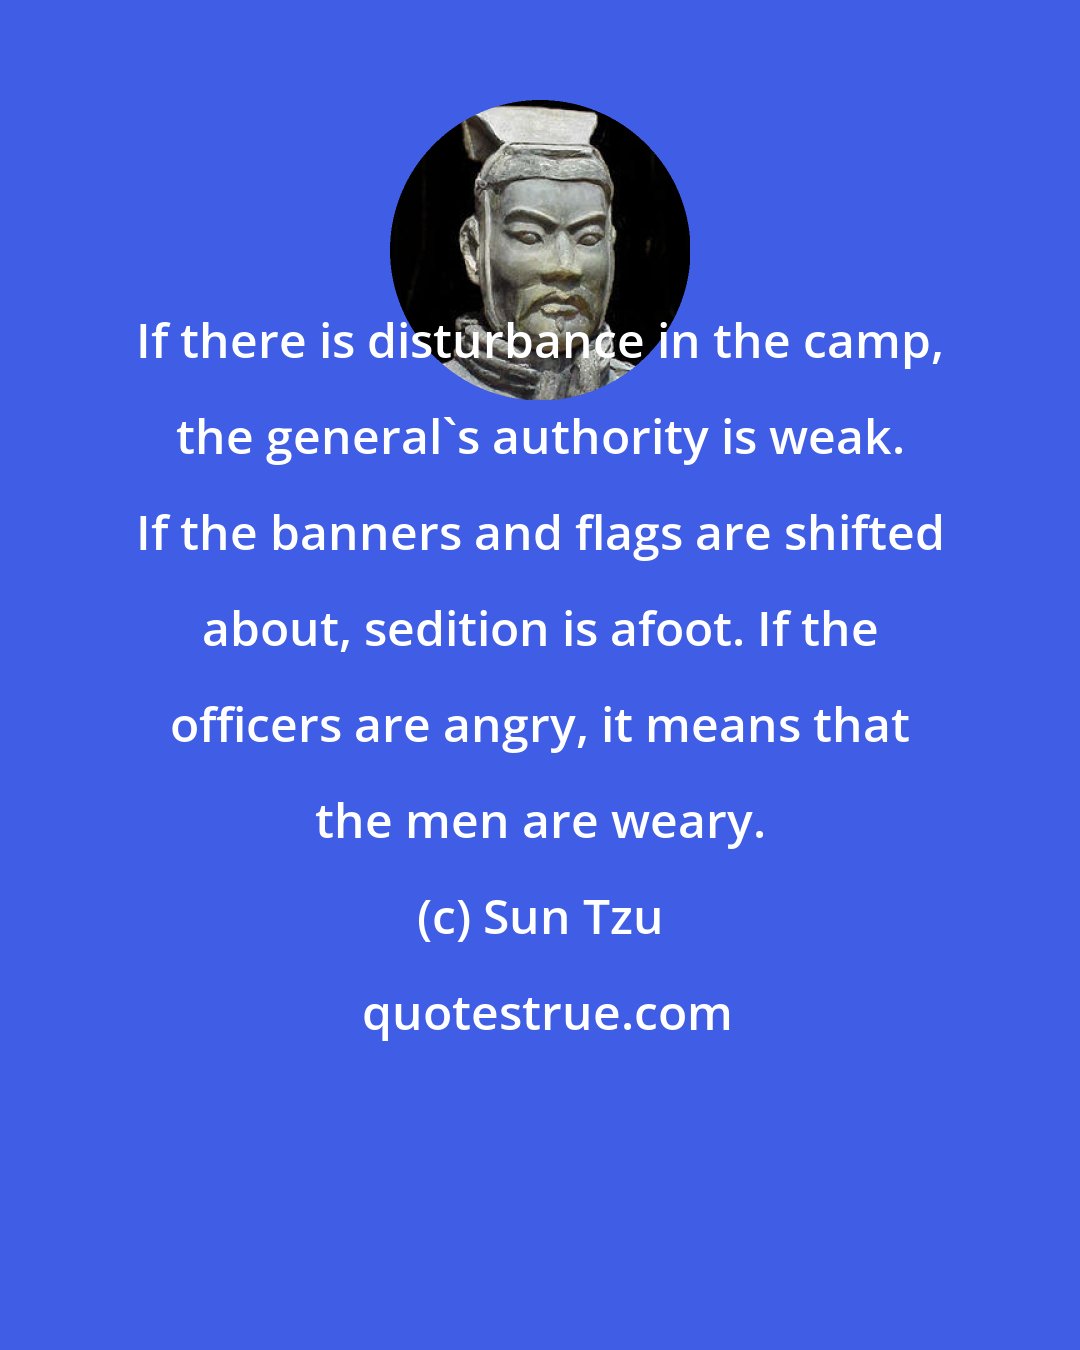 Sun Tzu: If there is disturbance in the camp, the general's authority is weak. If the banners and flags are shifted about, sedition is afoot. If the officers are angry, it means that the men are weary.